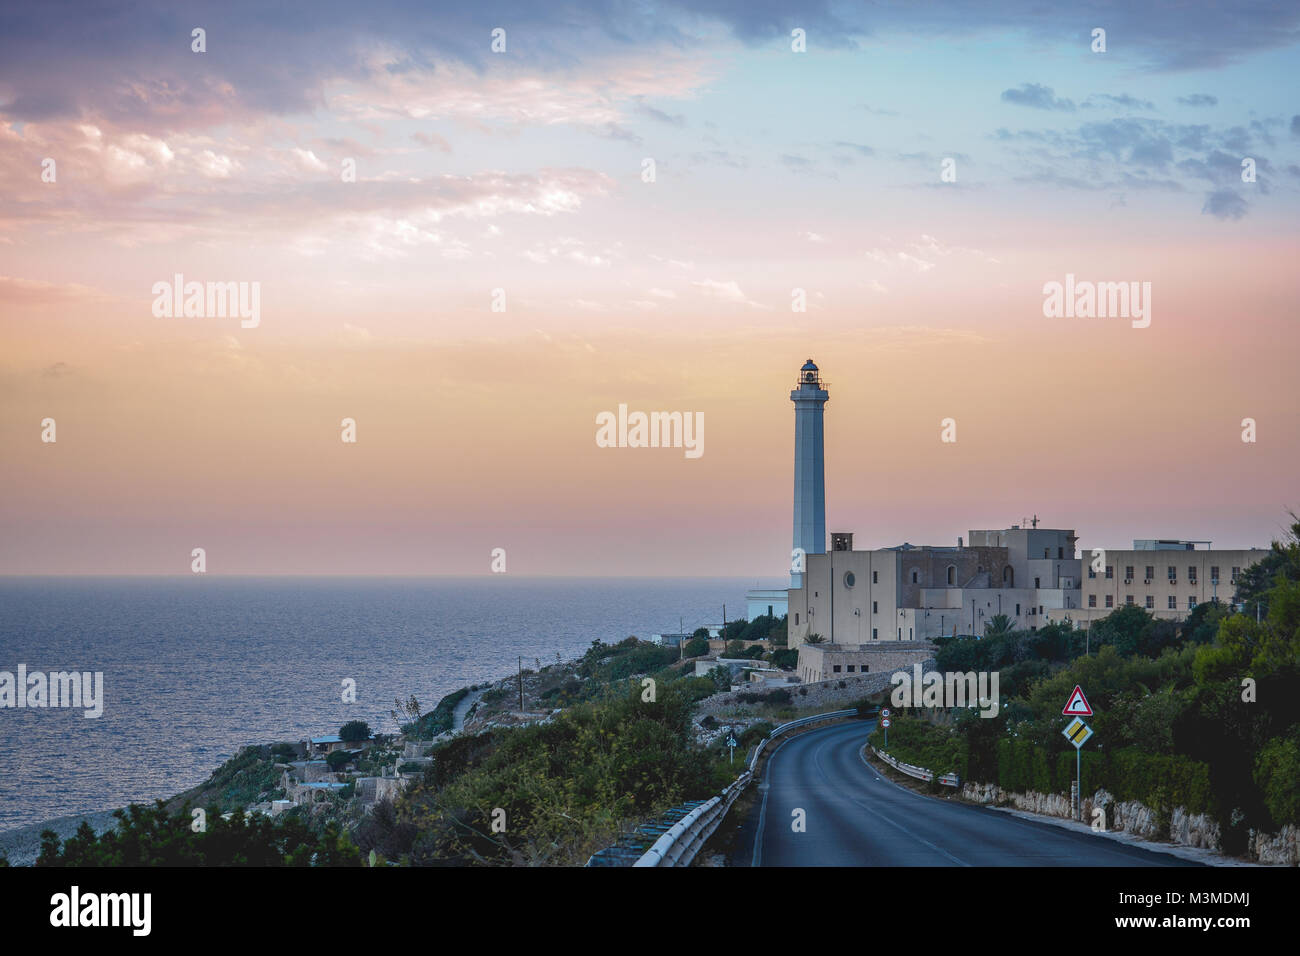 Santa Maria di Leuca (Italy), August 2017. View of the iconic lighthouse in Leuca, along the Apulian coast at sunset. Landscape format. Stock Photo